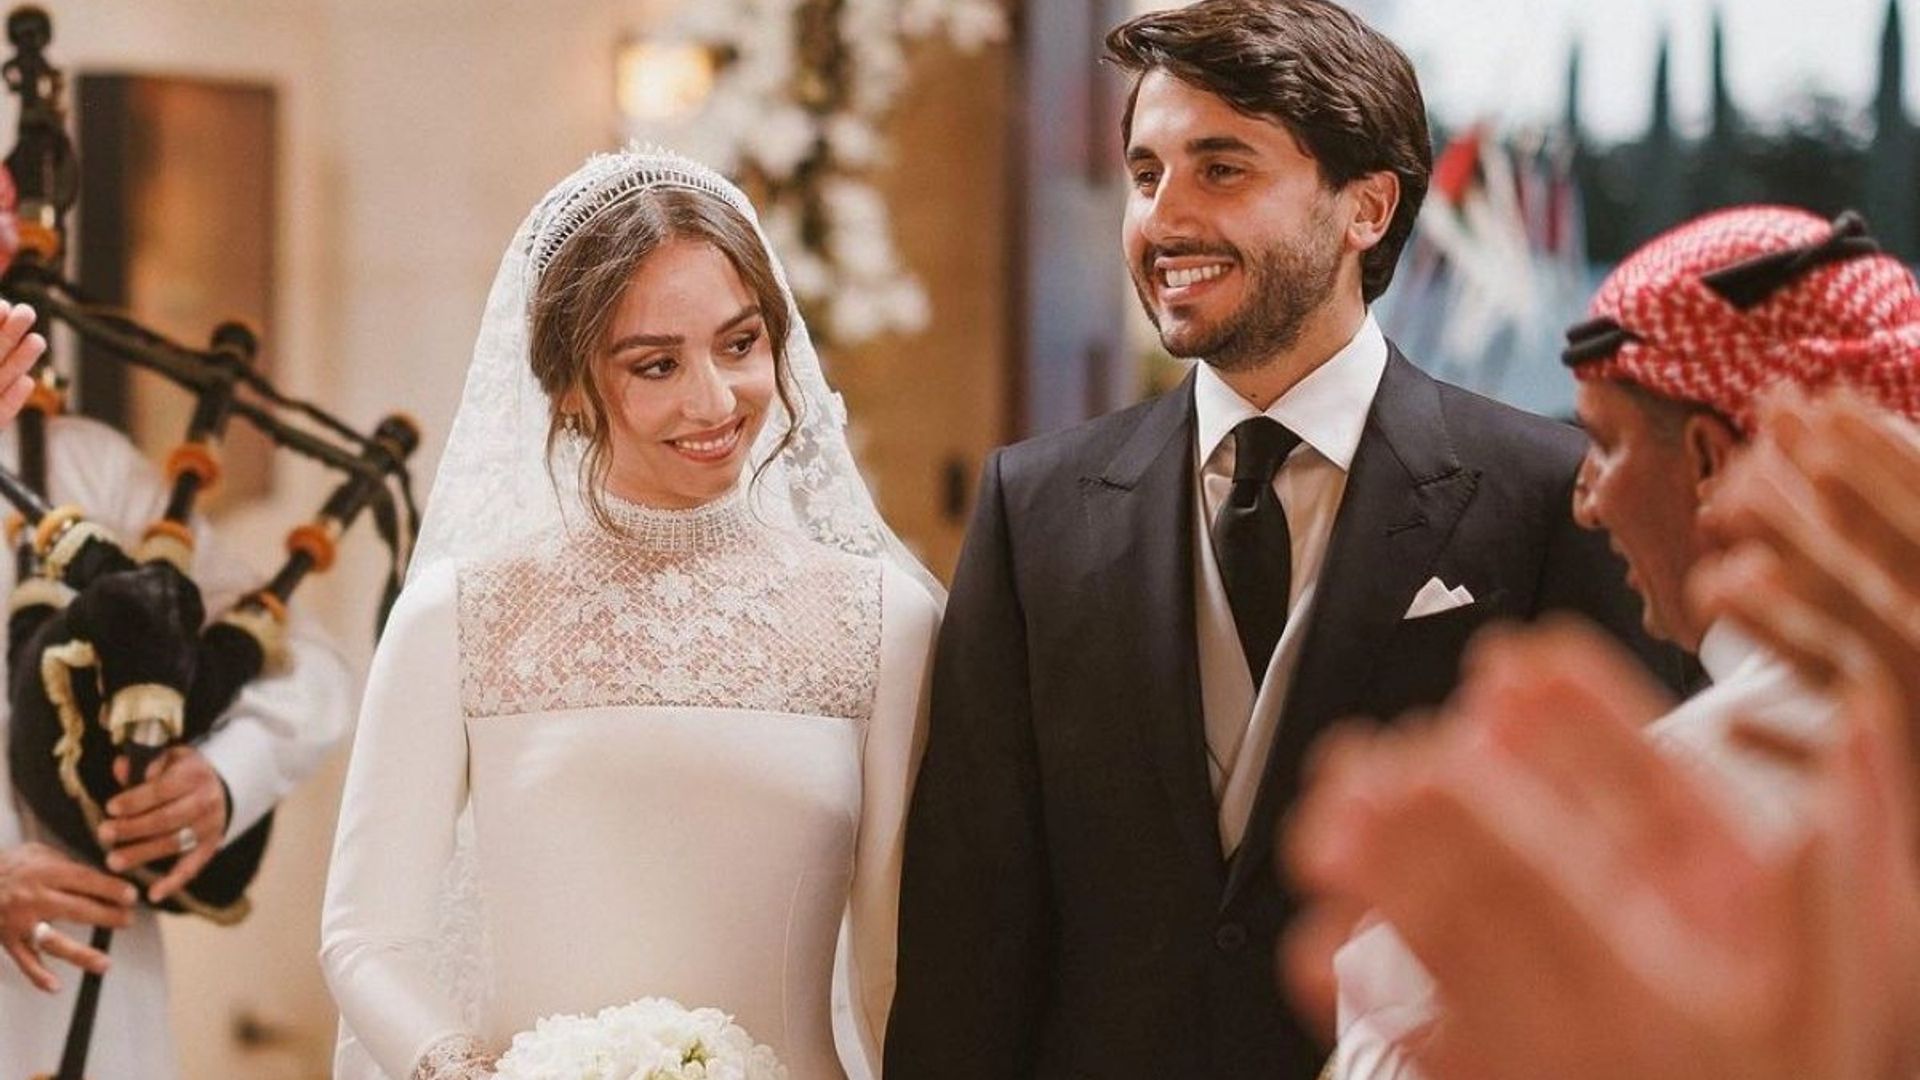 Princess Iman of Jordan Is Married! All About Her Bridal Style, Tiara